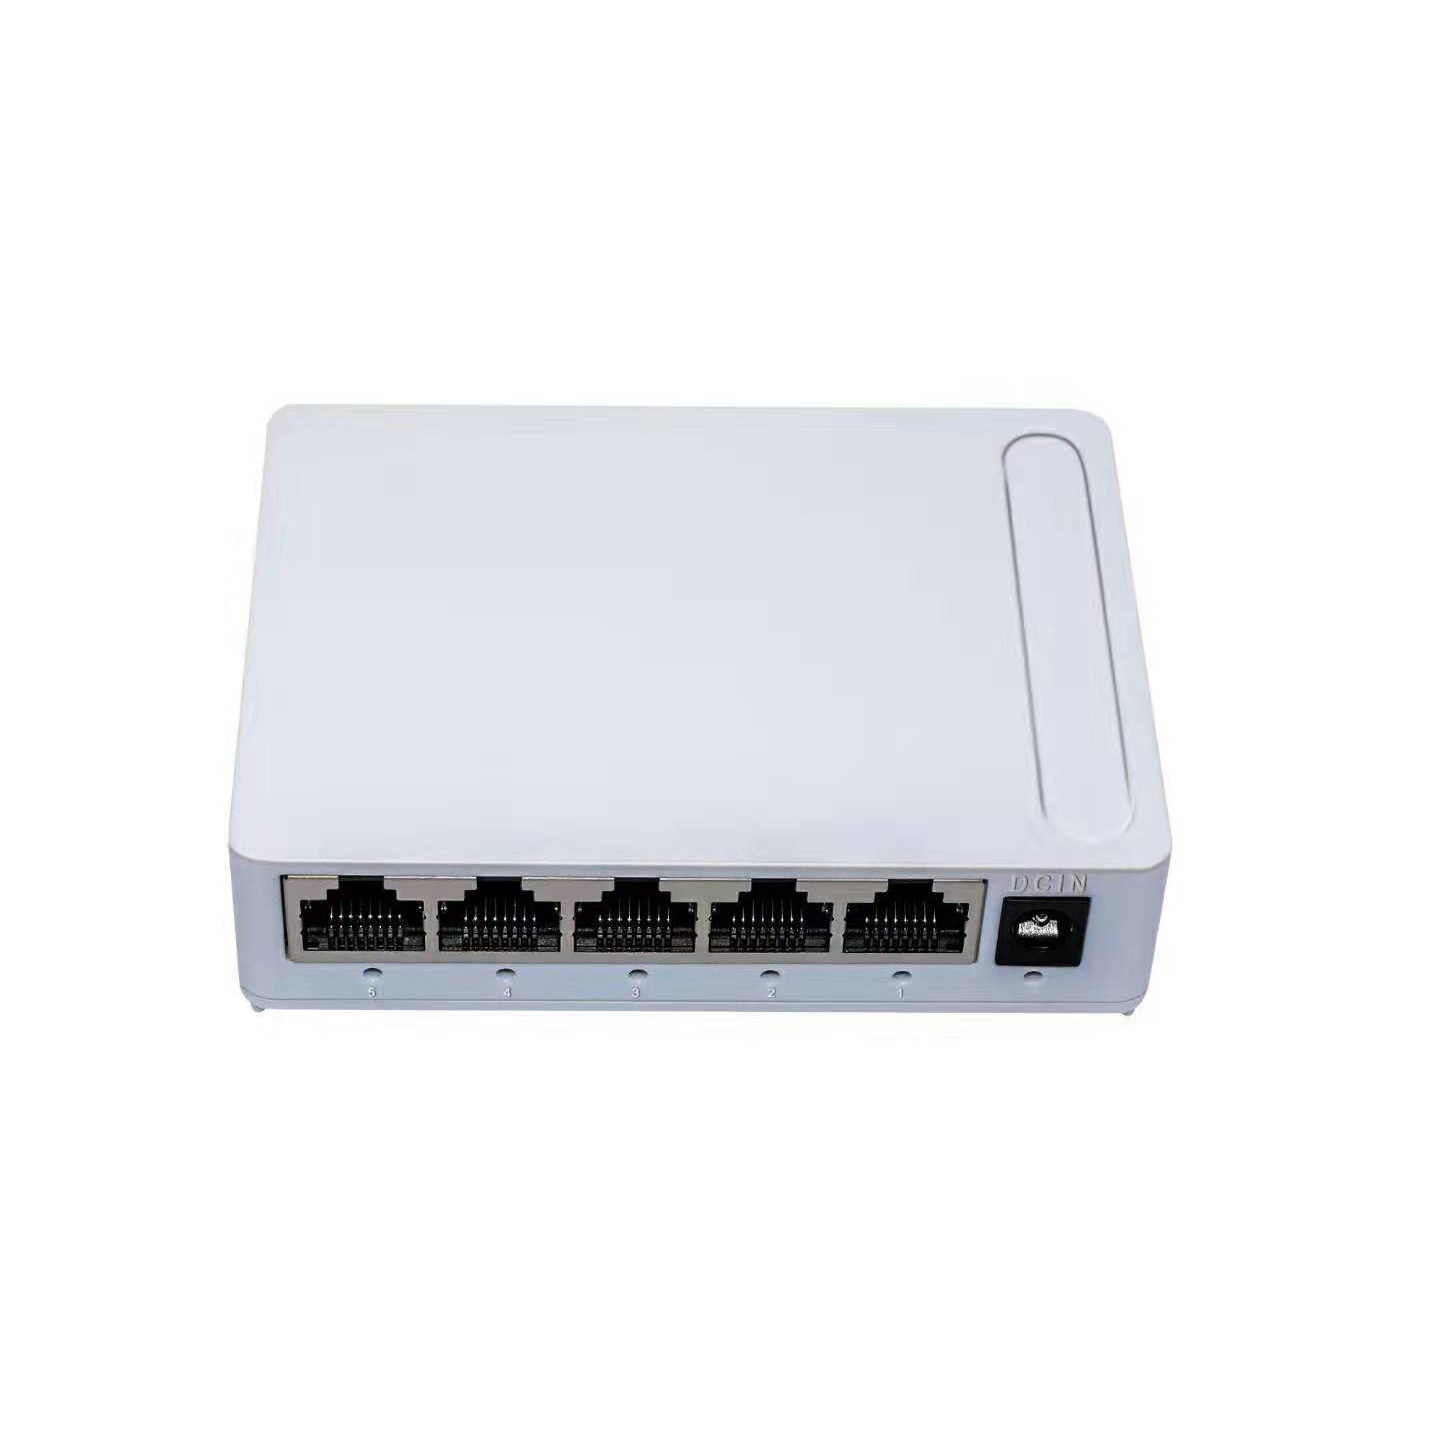 Shenzhen Factory Network Switch Gigabit 5-Port 10/100/1000Mbps Ethernet Unmanaged Switch Featured Image